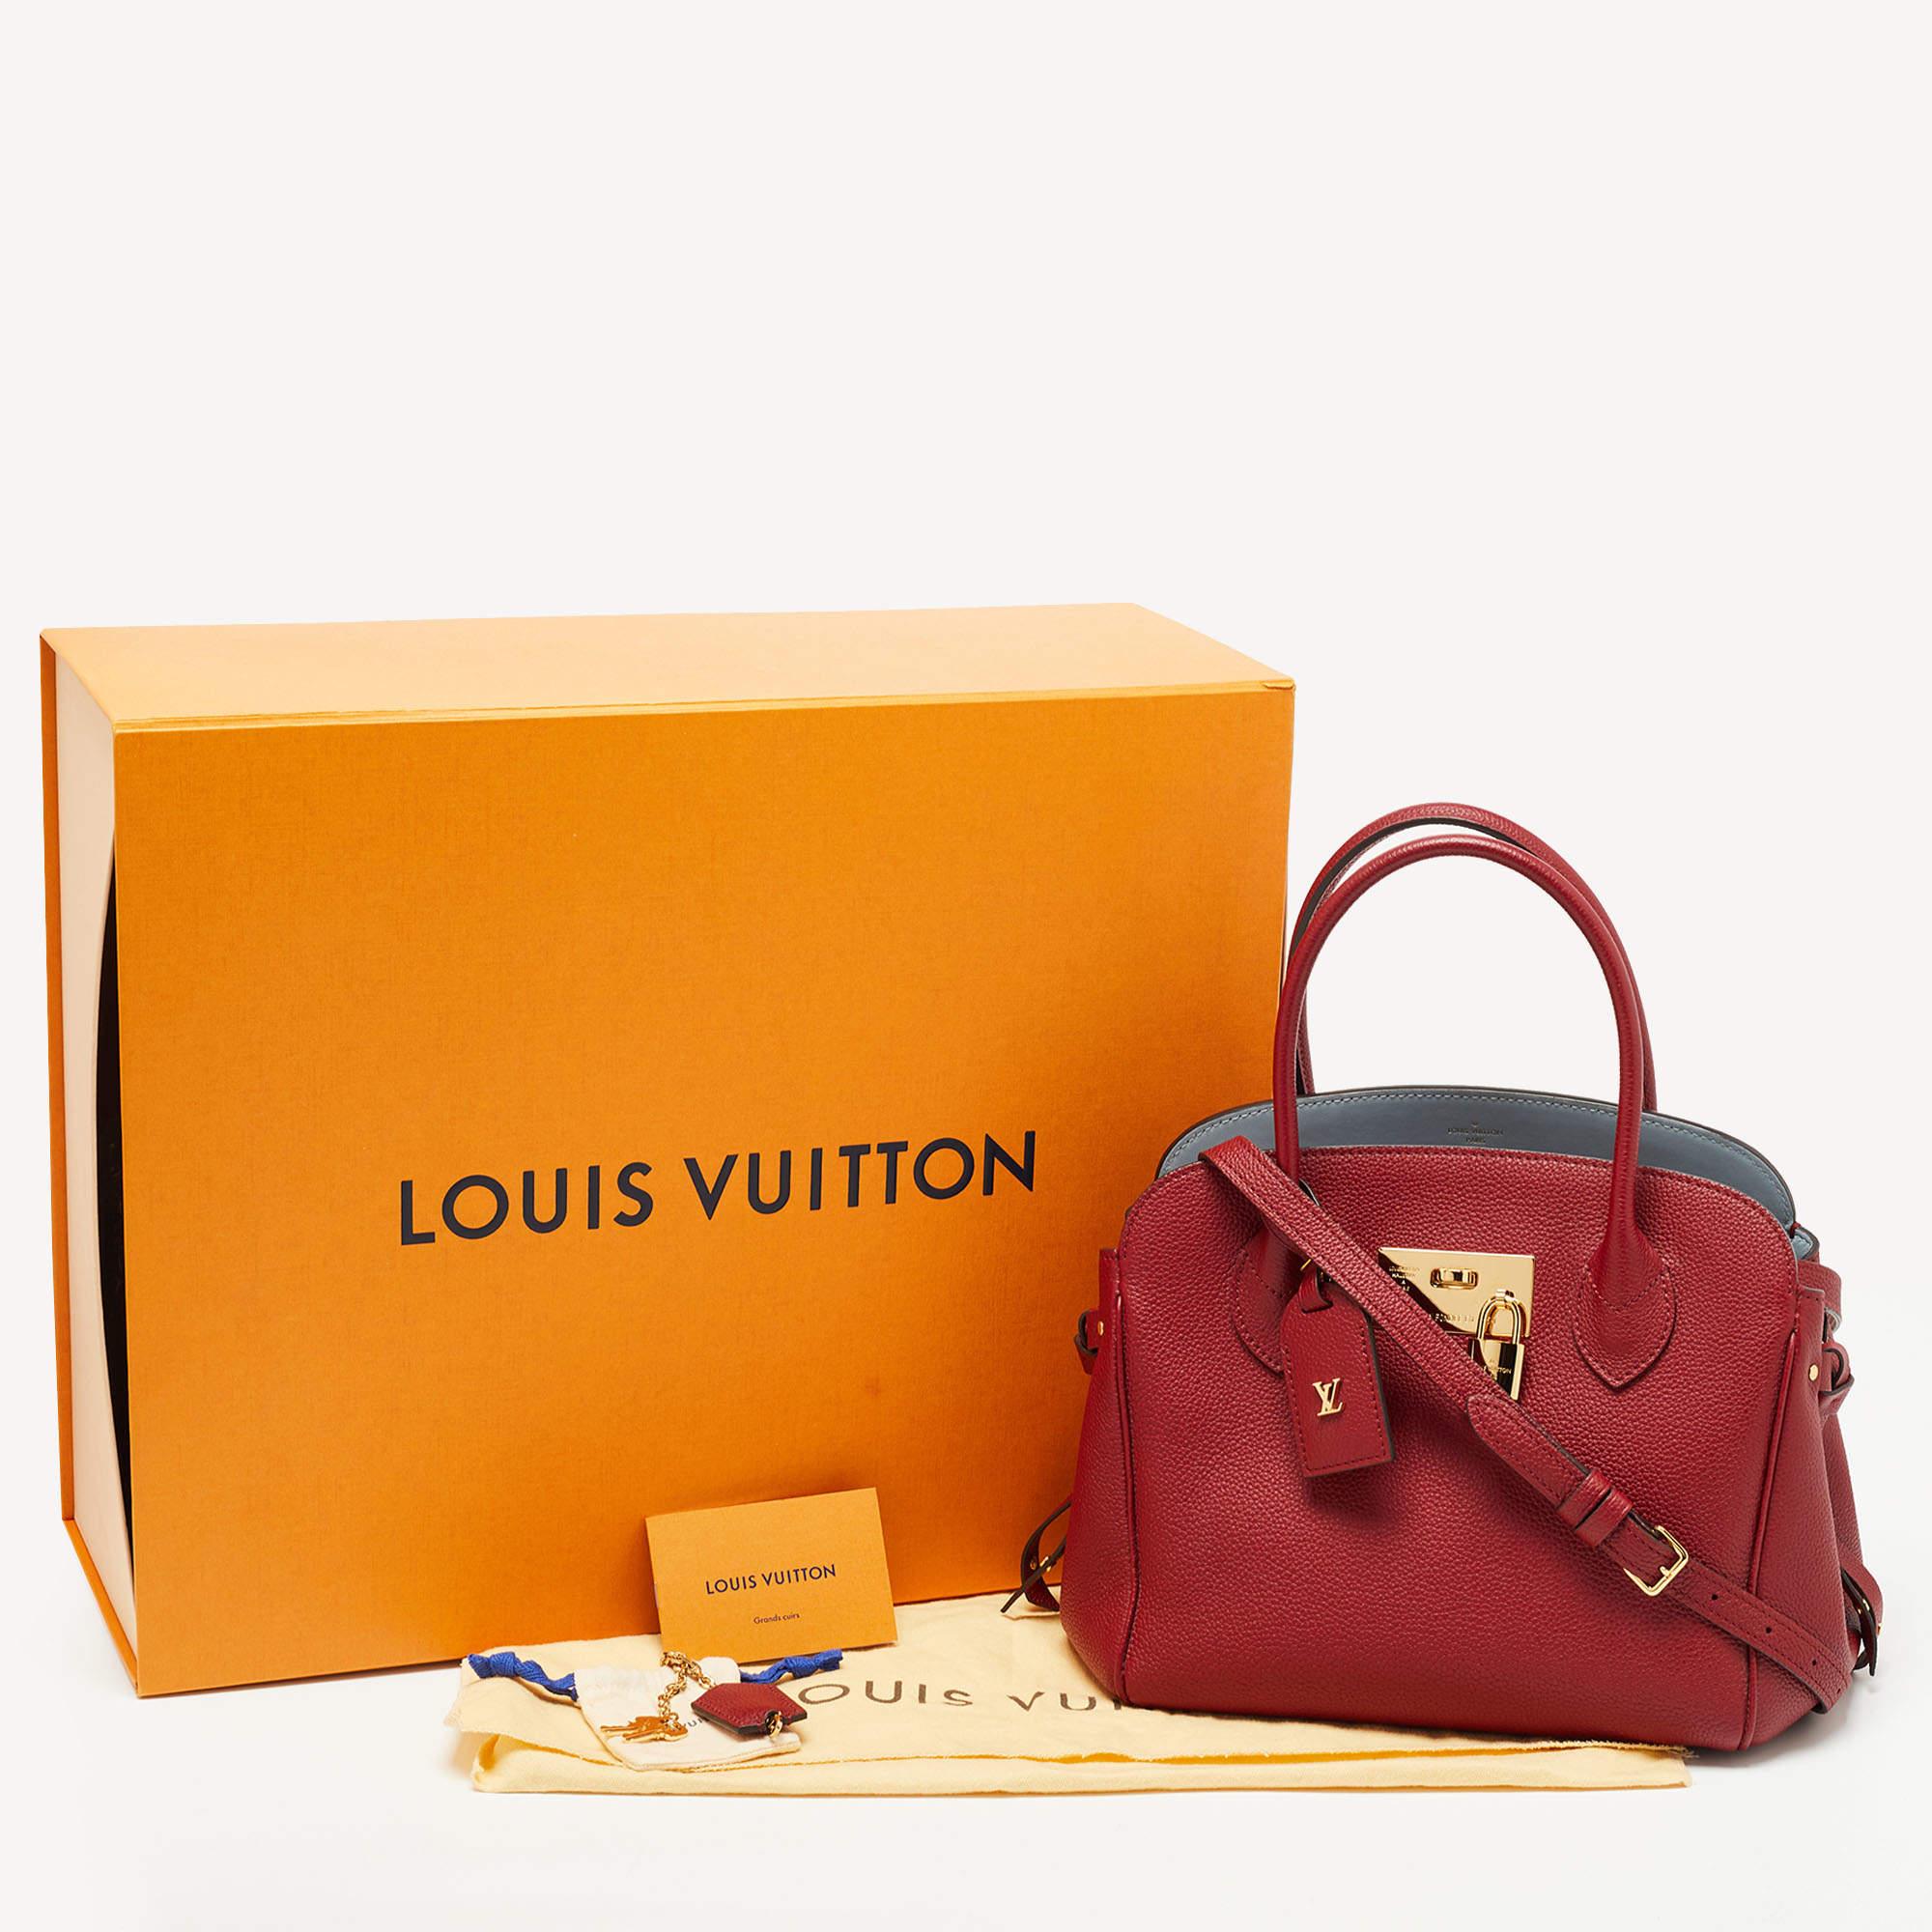 Louis Vuitton Red Leather 2Way Milla PM Bag 9